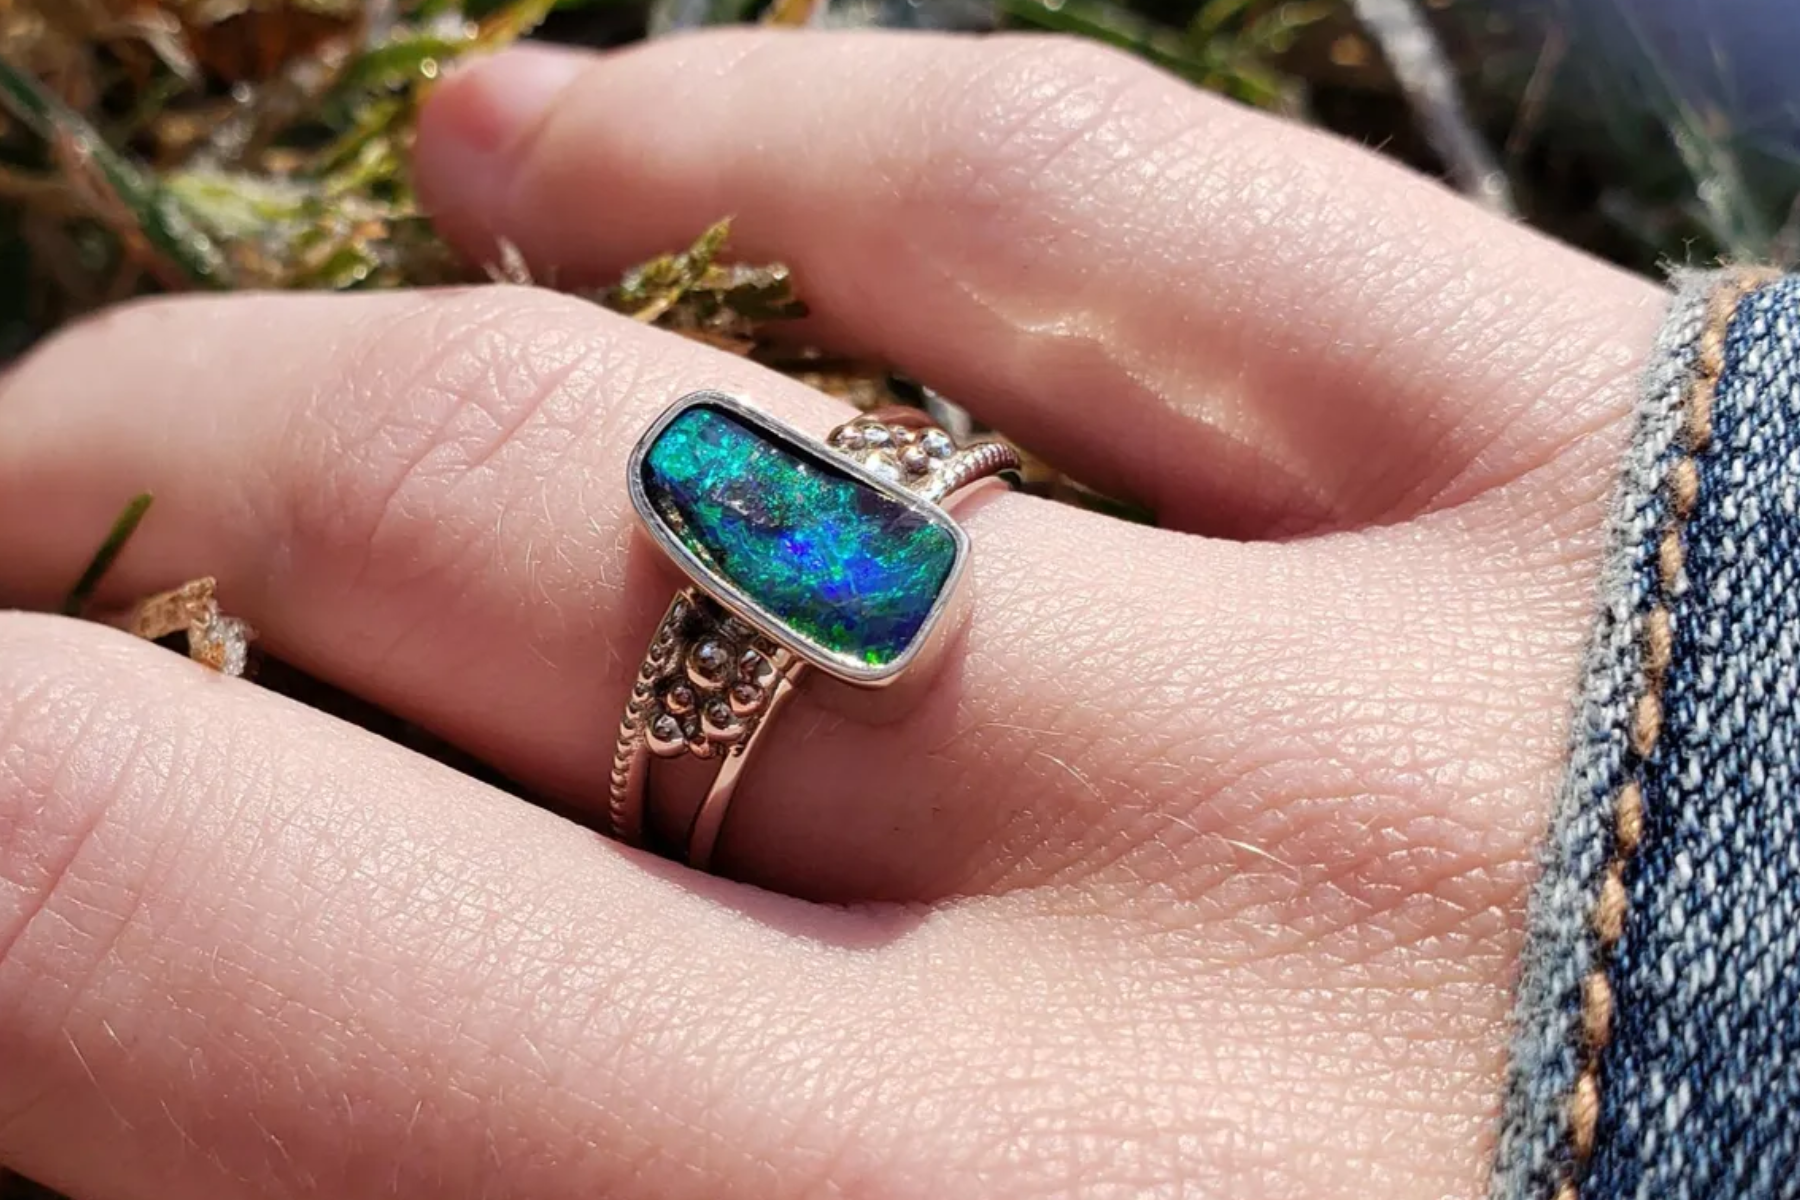 Opal ring on woman's finger